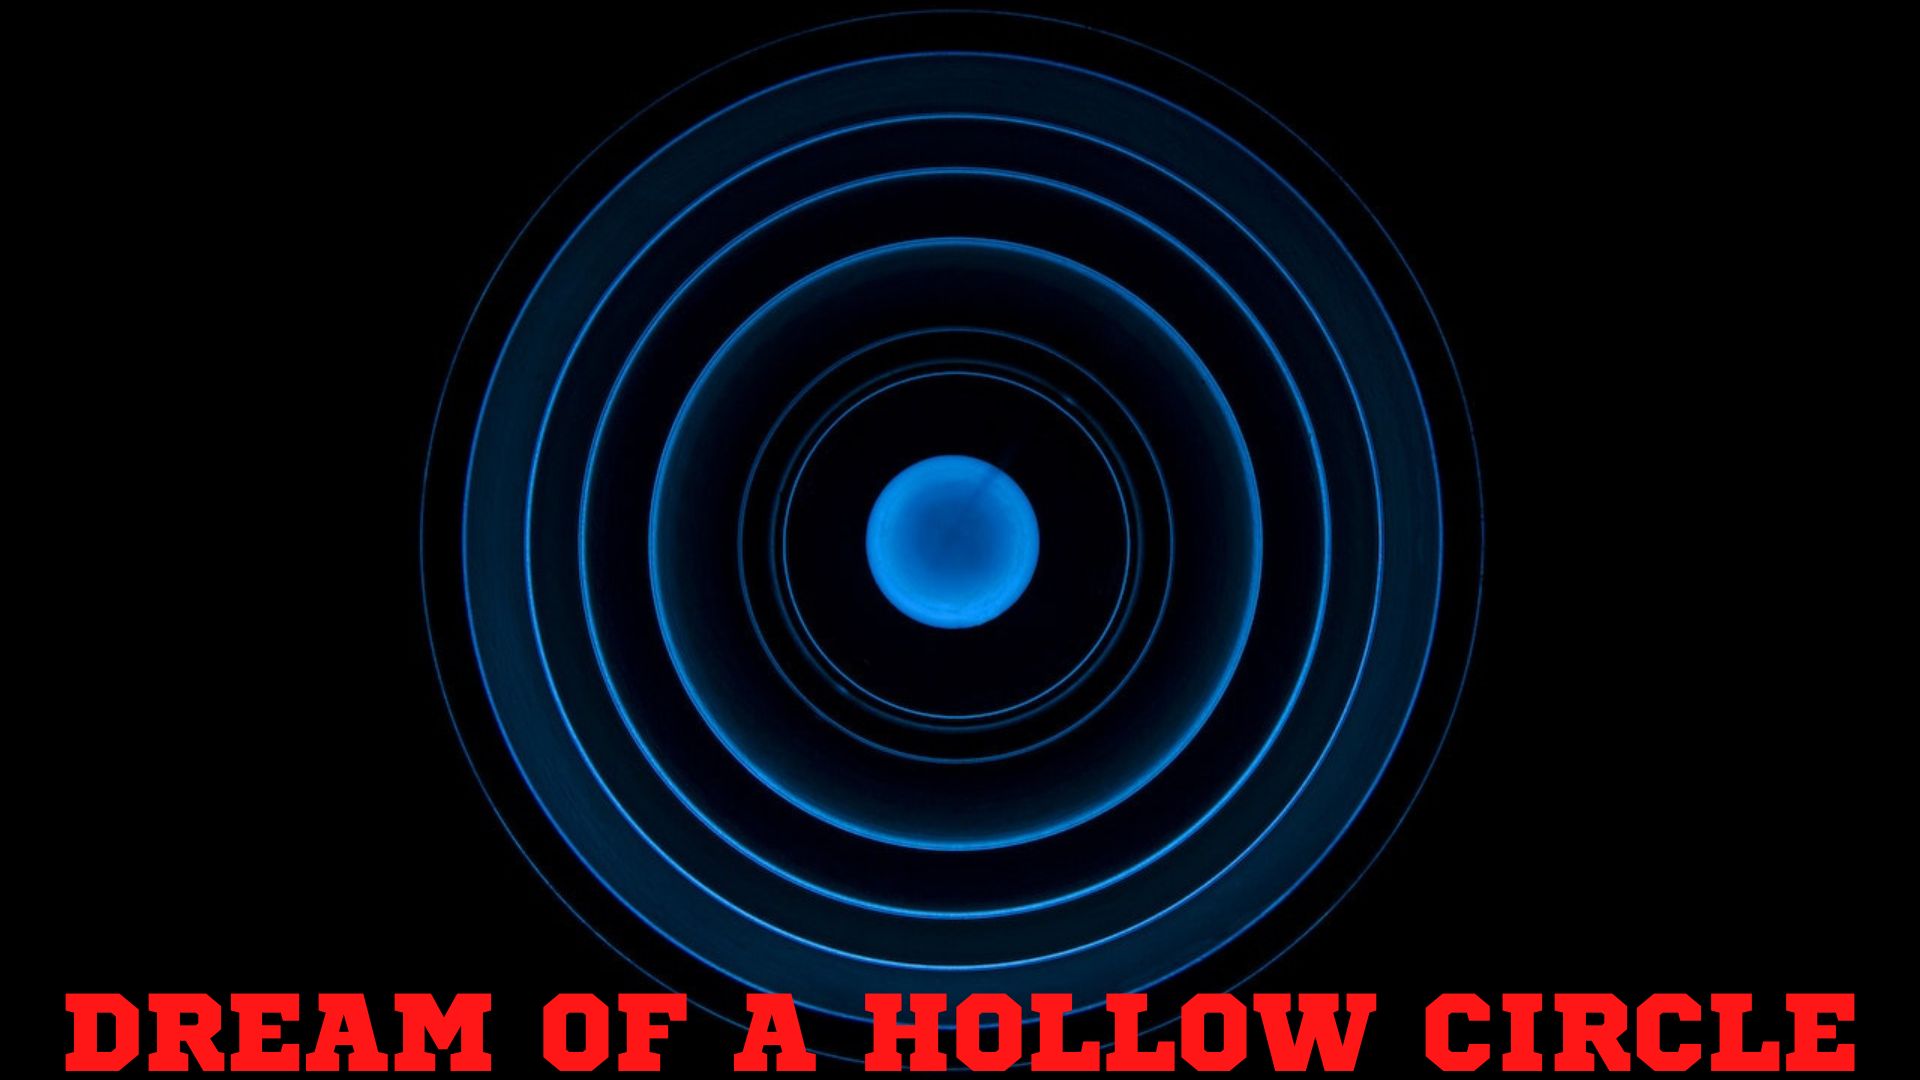 Dream Of A Hollow Circle - Symbolizes Cycle, Perfection, Completeness, And Reliability